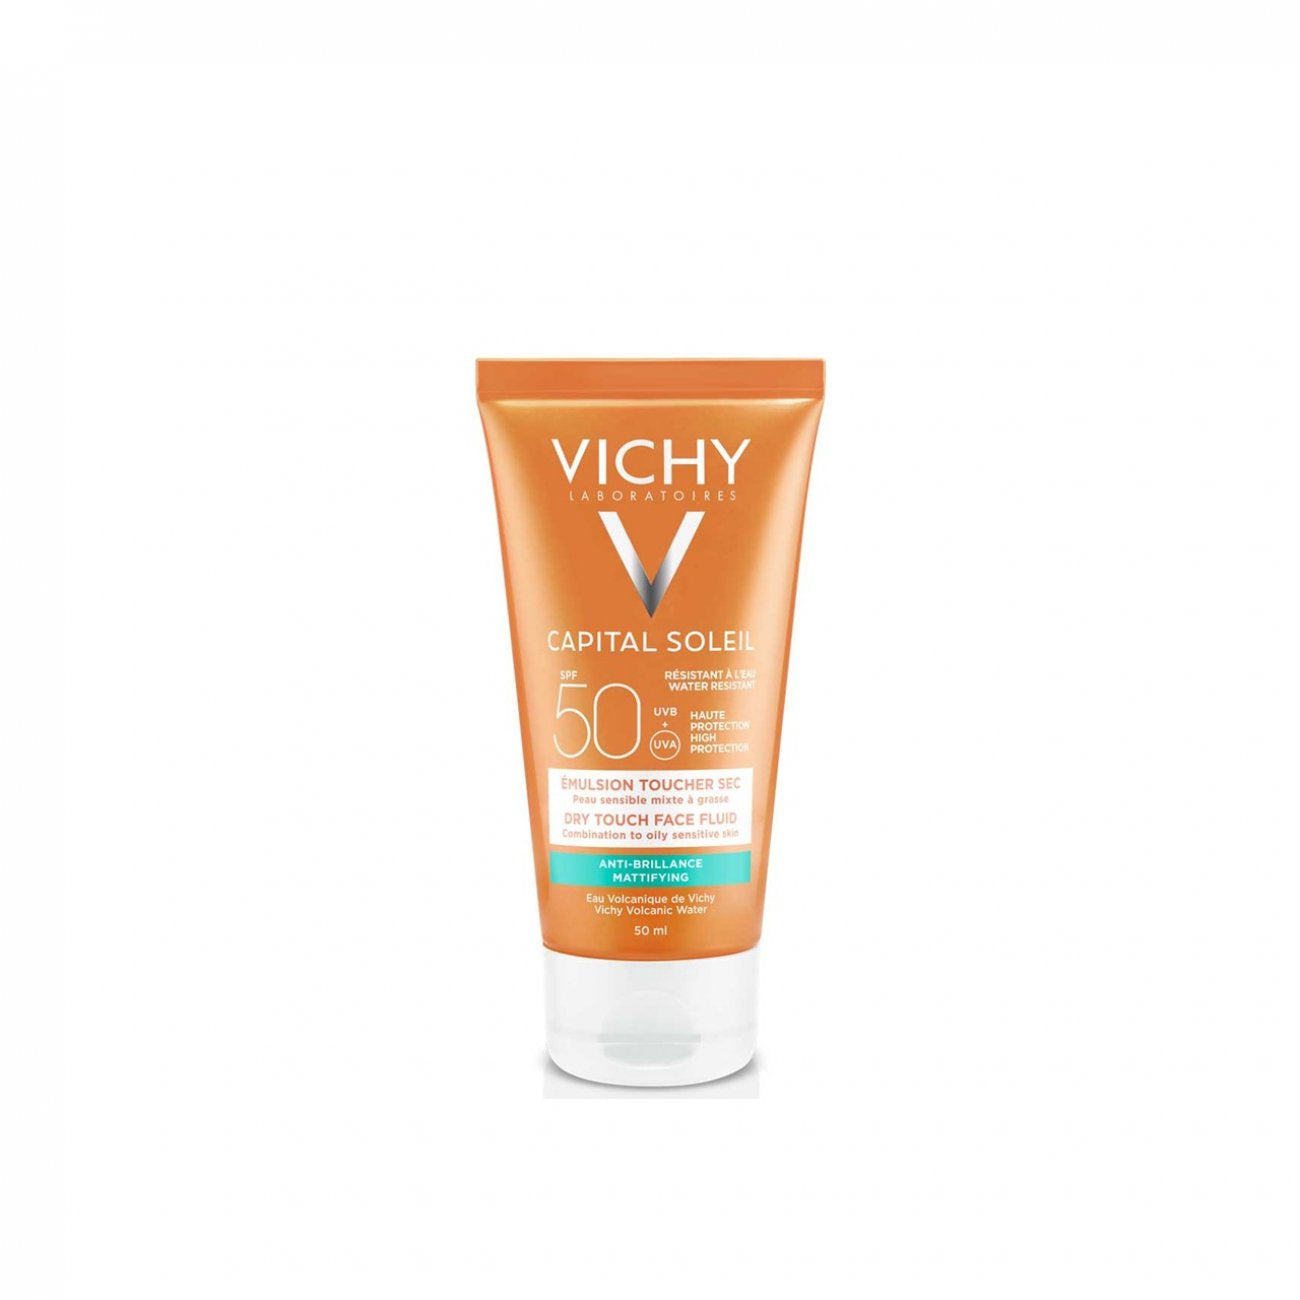 Vichy Dry-Touch Spf 50 BB - The Power Chic